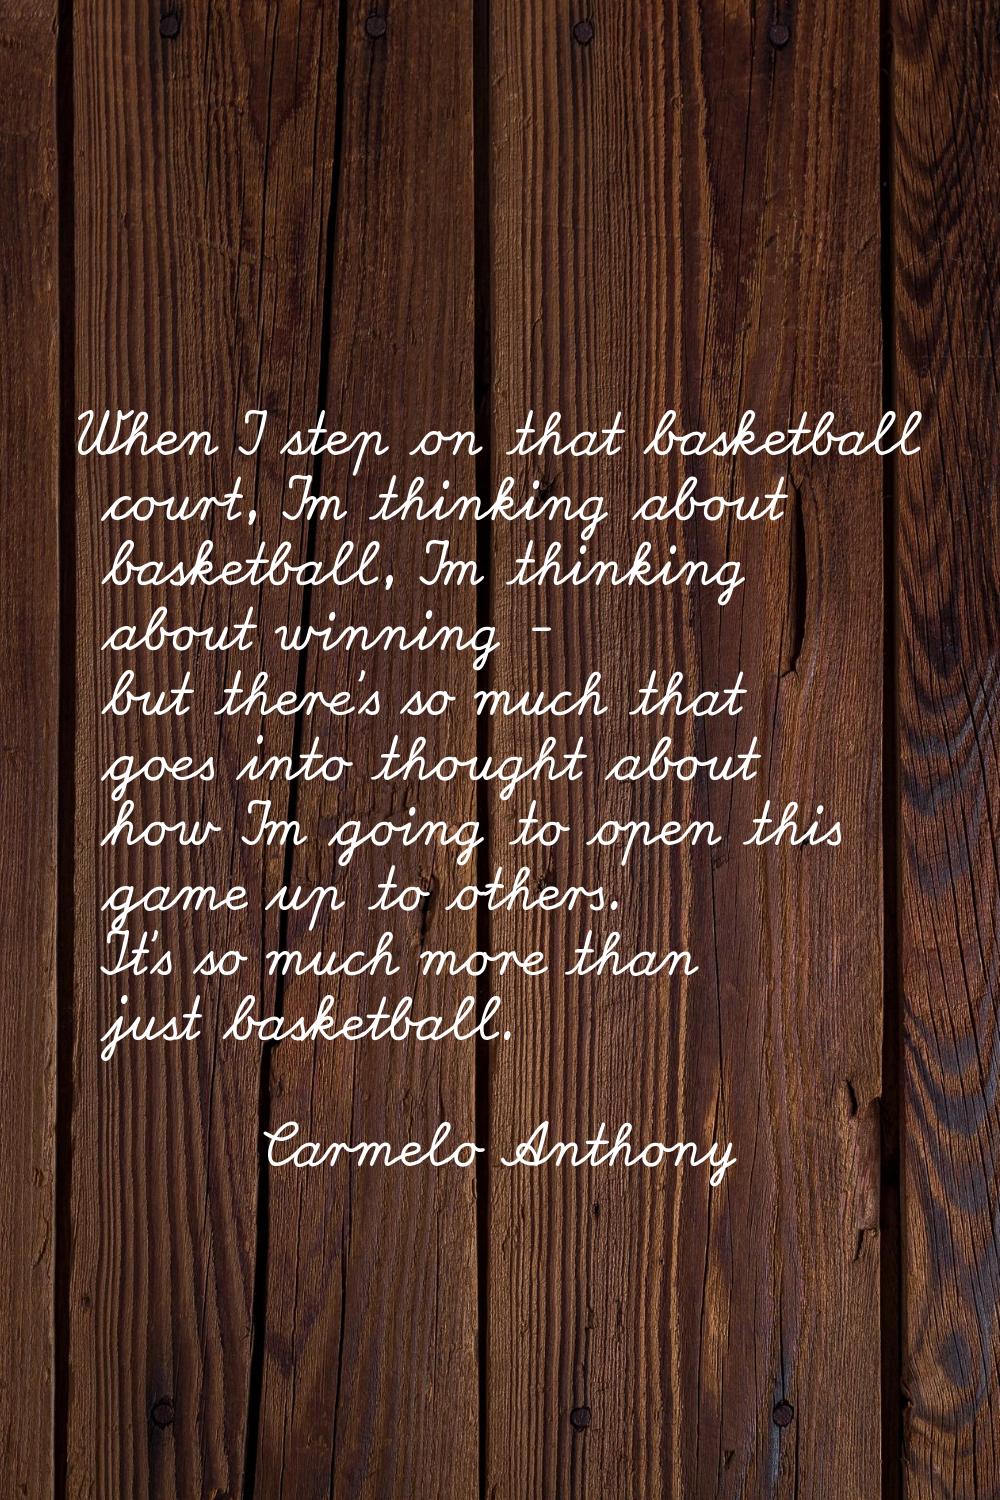 When I step on that basketball court, I'm thinking about basketball, I'm thinking about winning - b